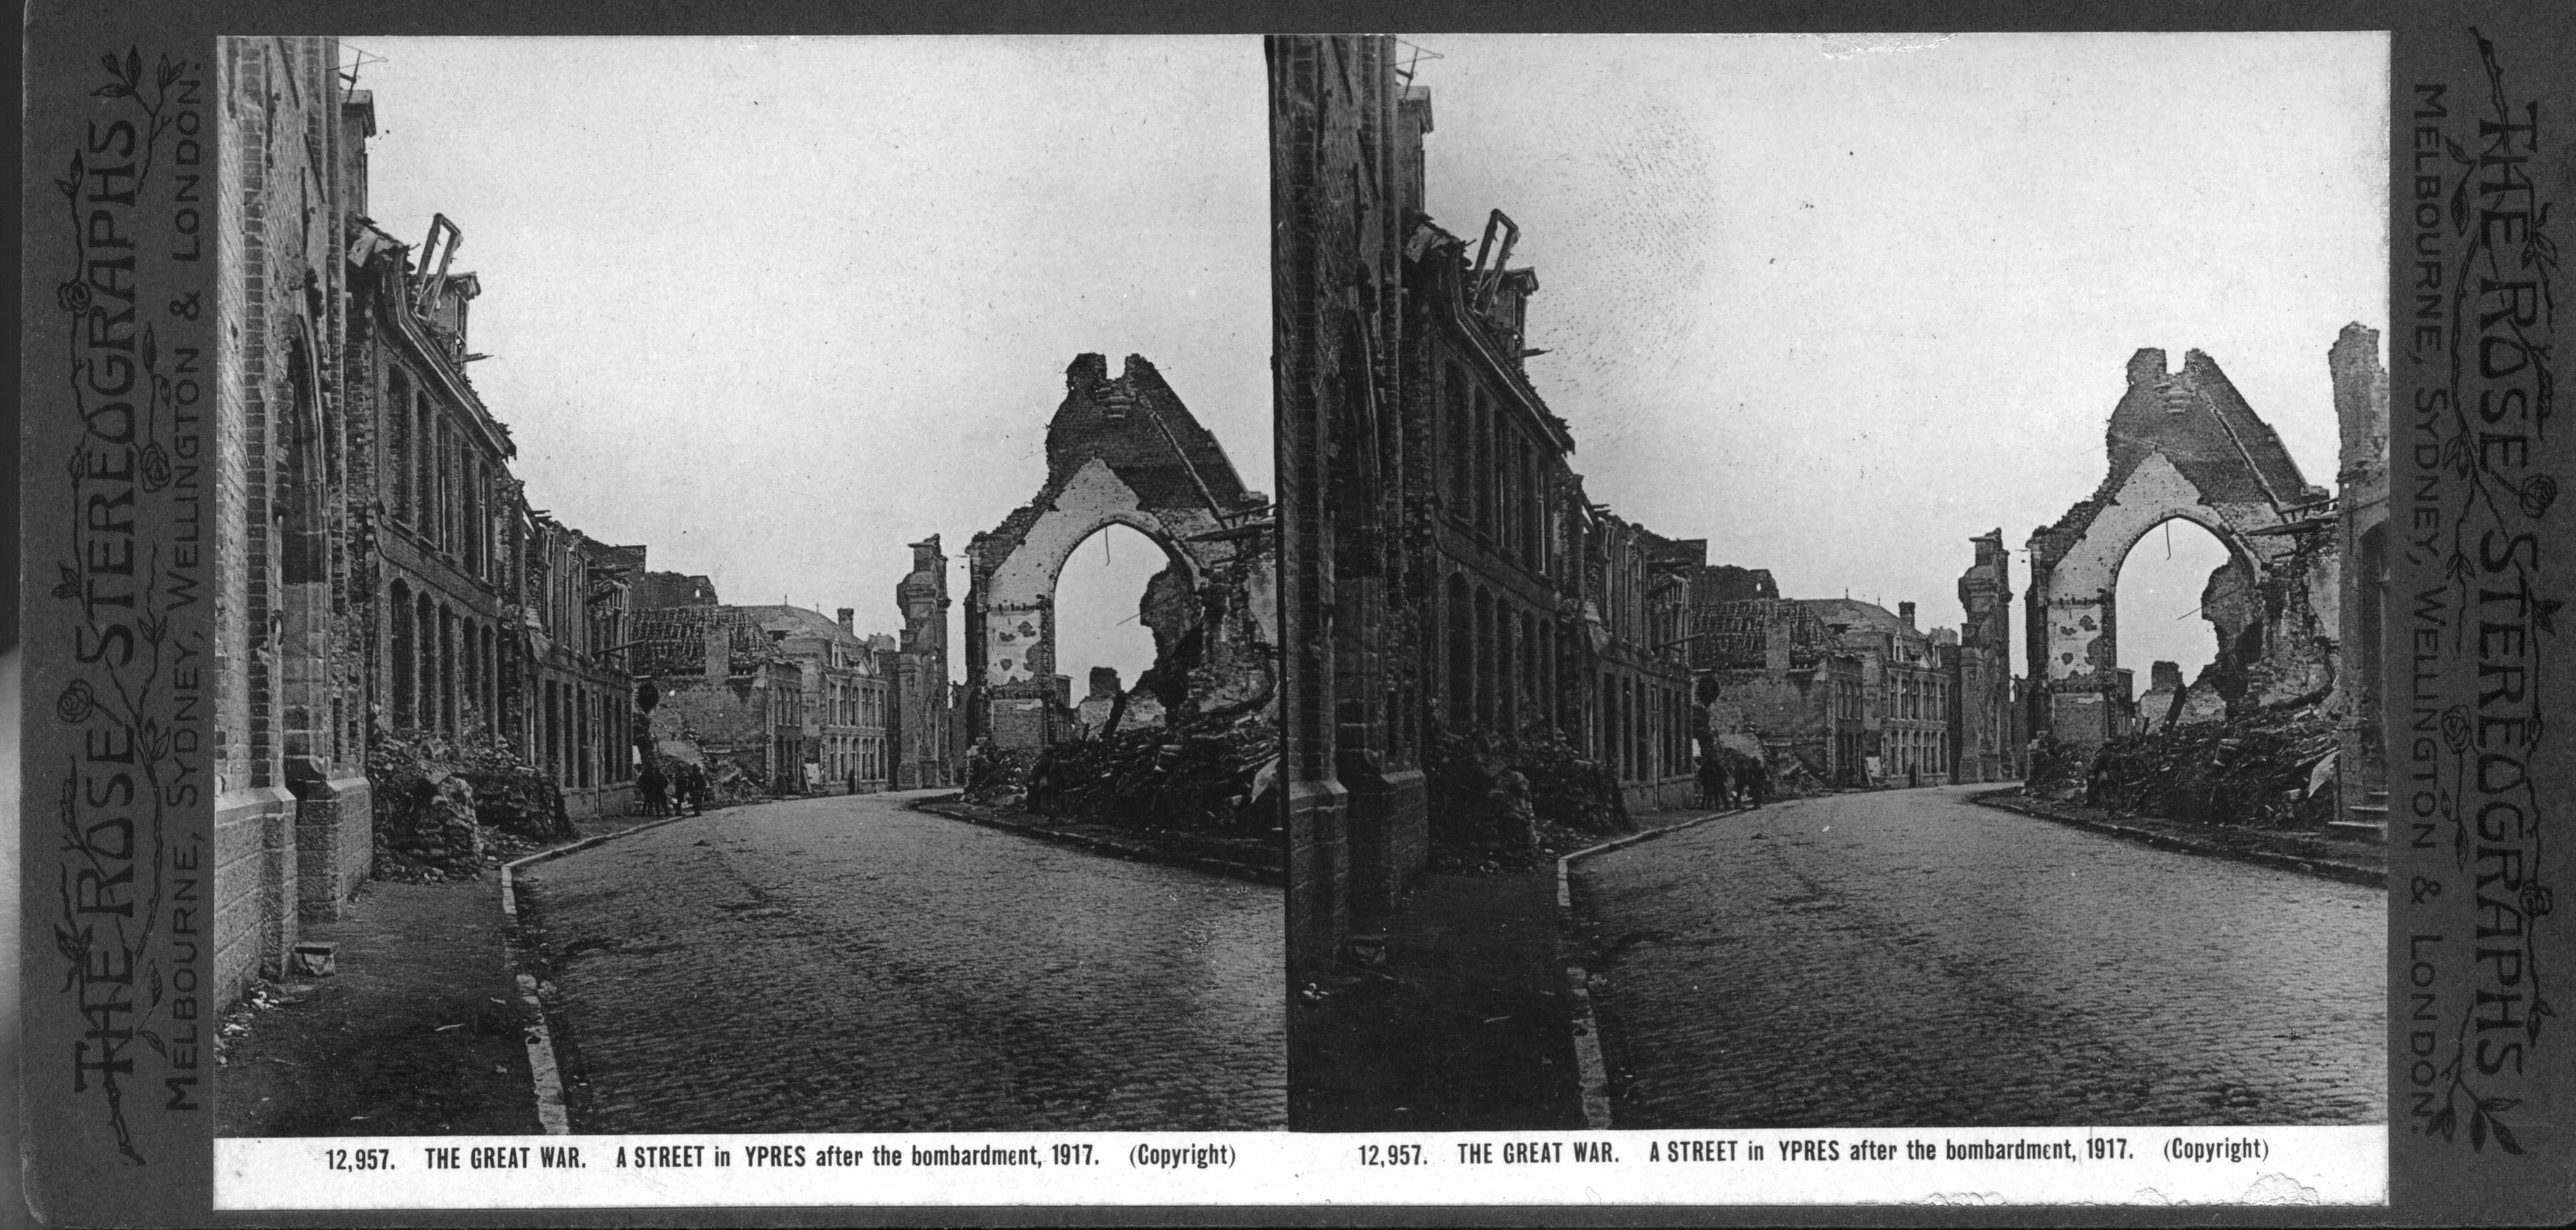 THE GREAT WAR. A STREET in YPRES after the bombardment, 1917.